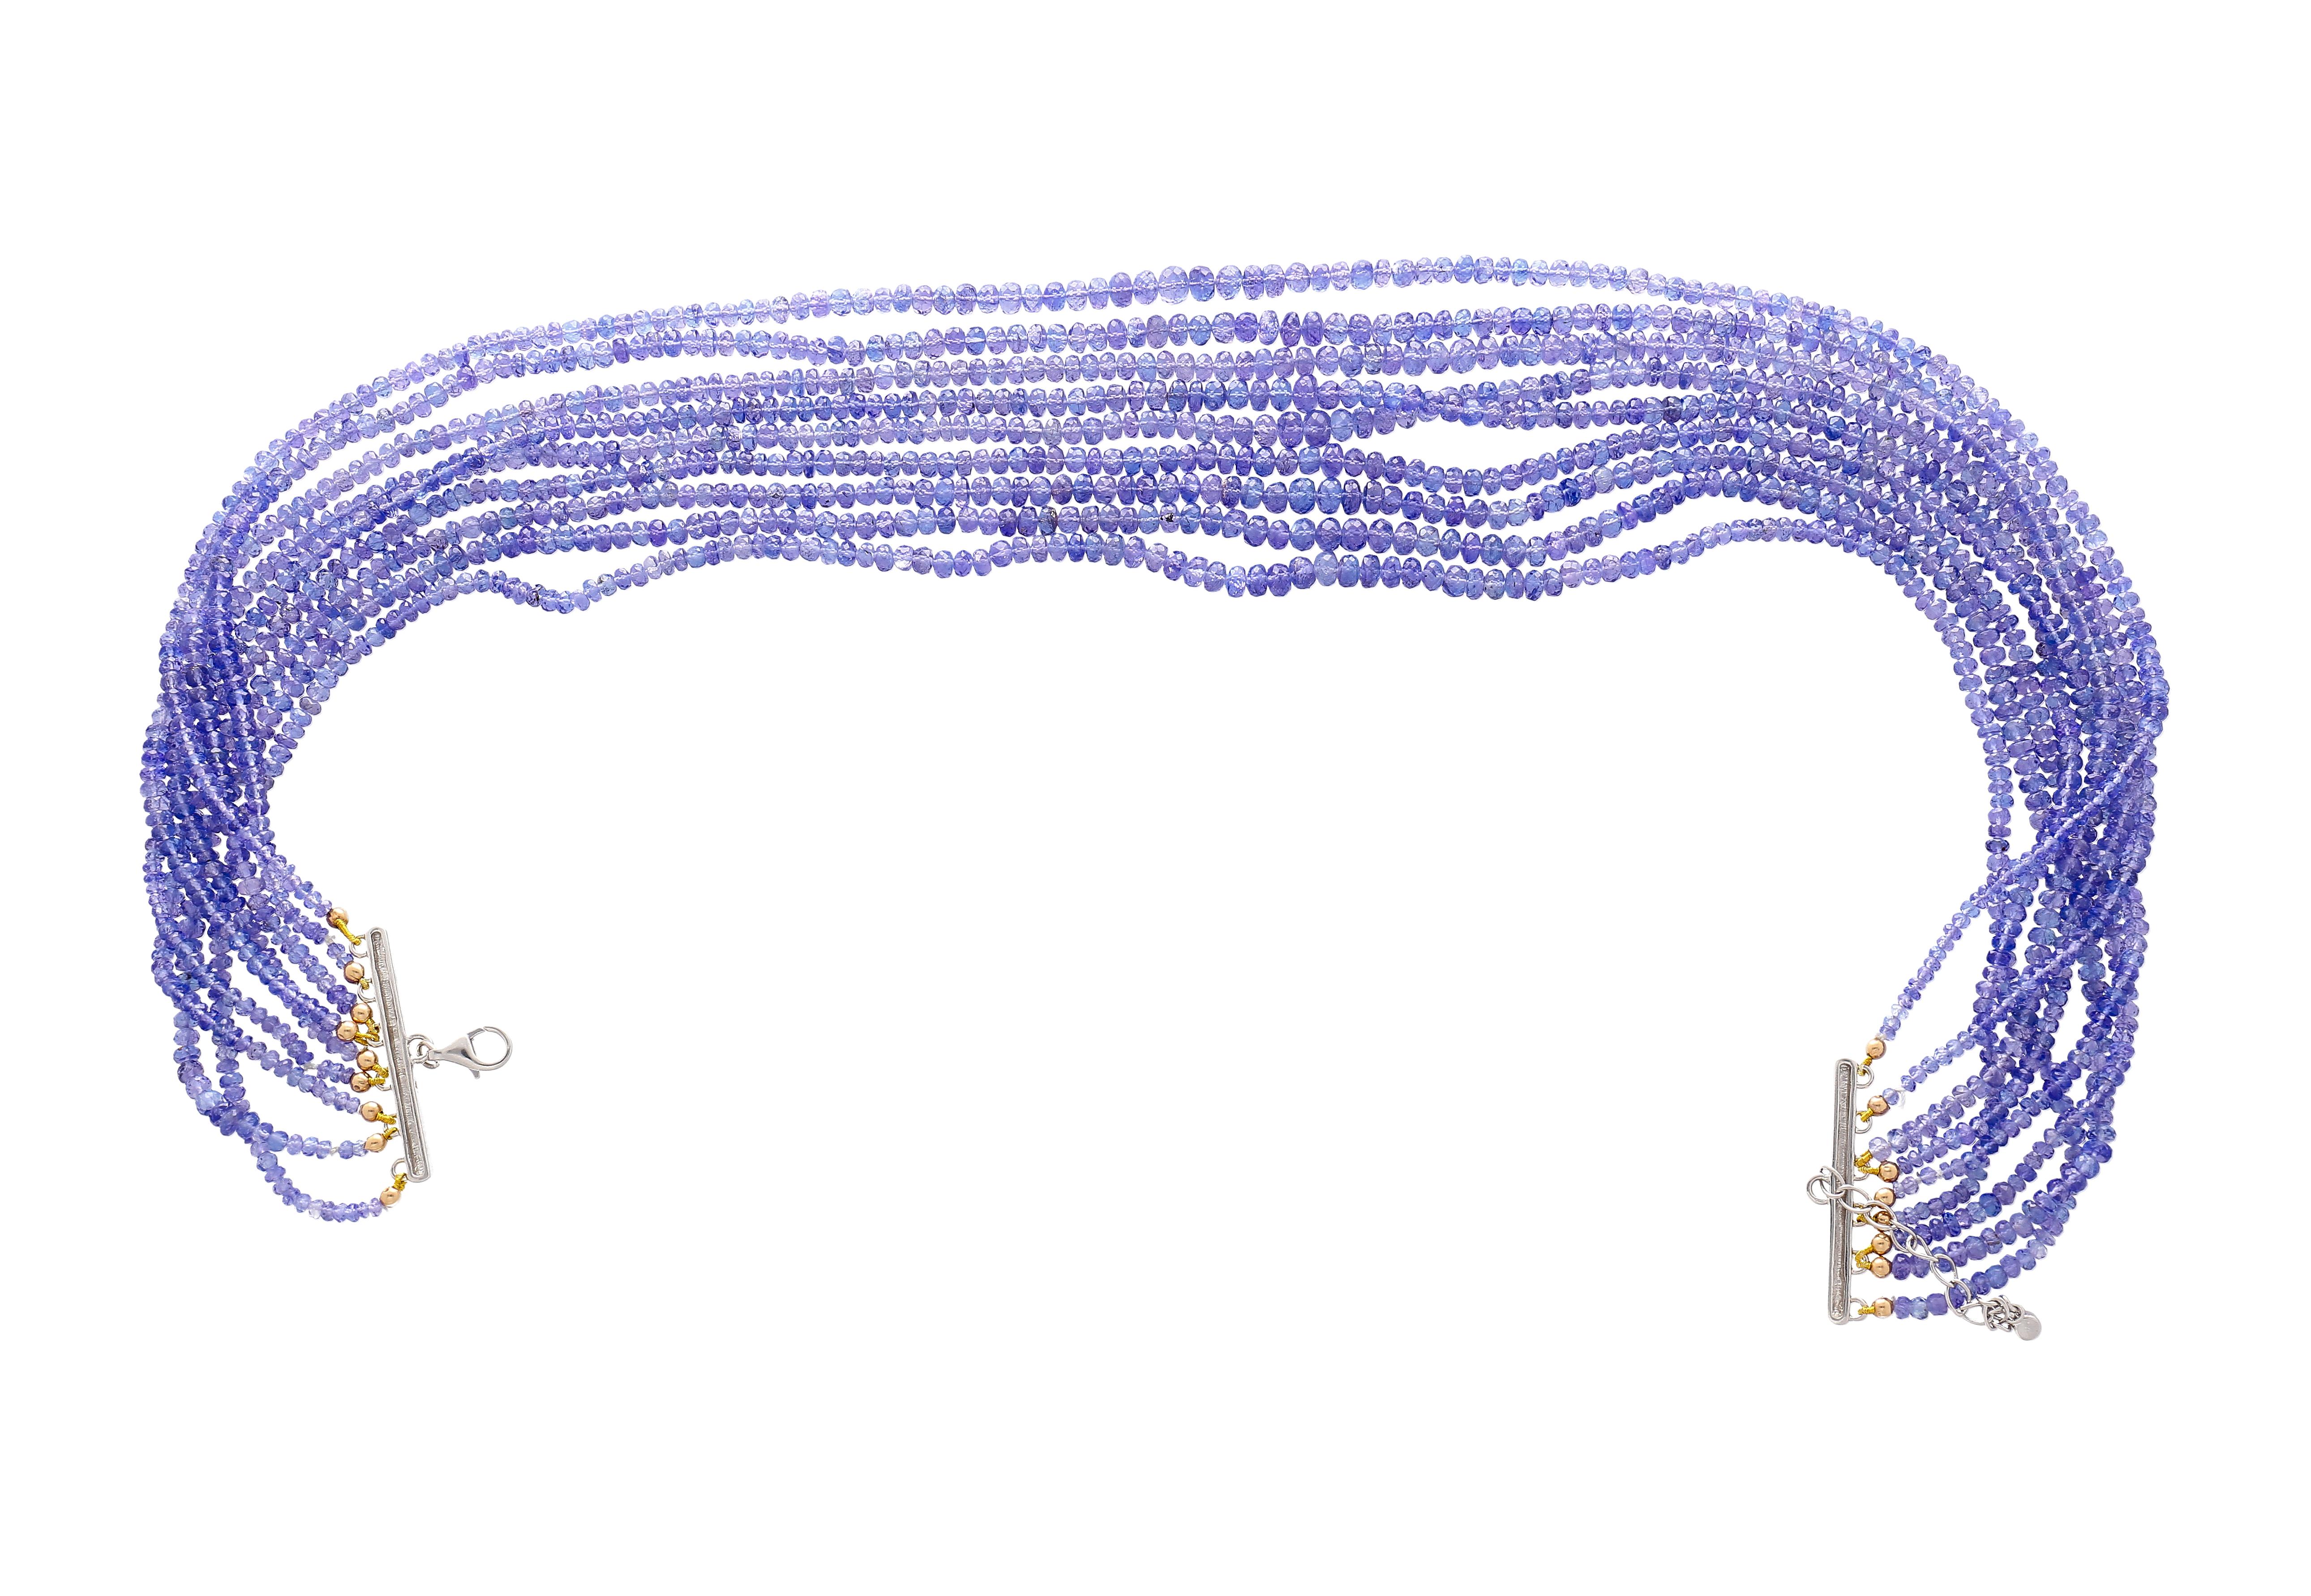 18K White Gold Tanzanite Bead & Diamond Multi Strand Necklace.

This beautiful necklace measuring 17.5 inches, features an array of 1713 pieces of blue tanzanite beads with a Carat weight of 560 total, strung across the multiple strands. The